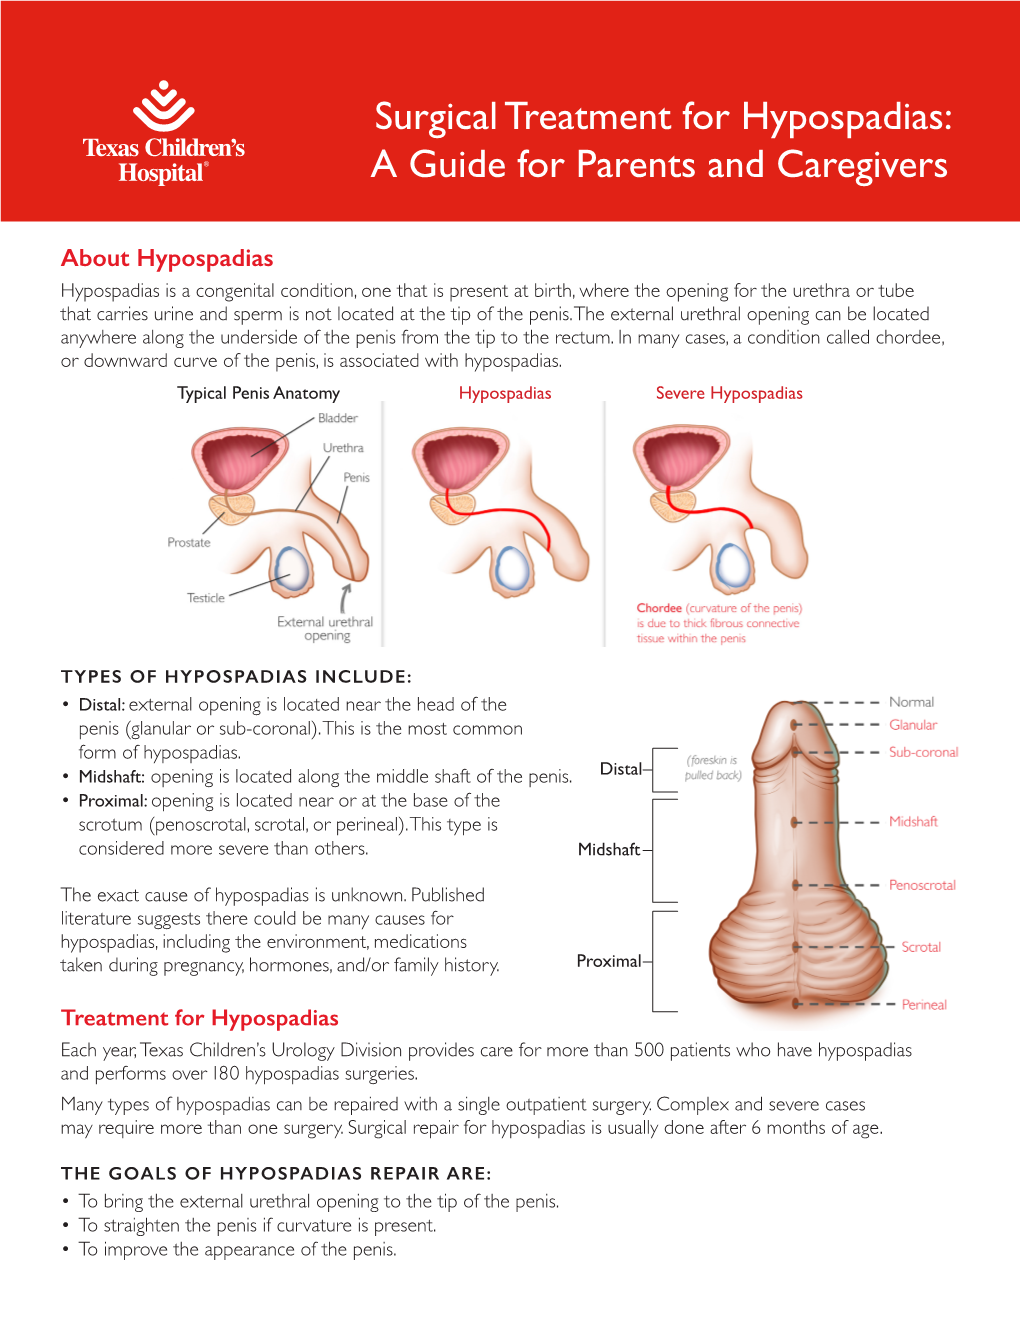 Surgical Treatment for Hypospadias: a Guide for Parents and Caregivers